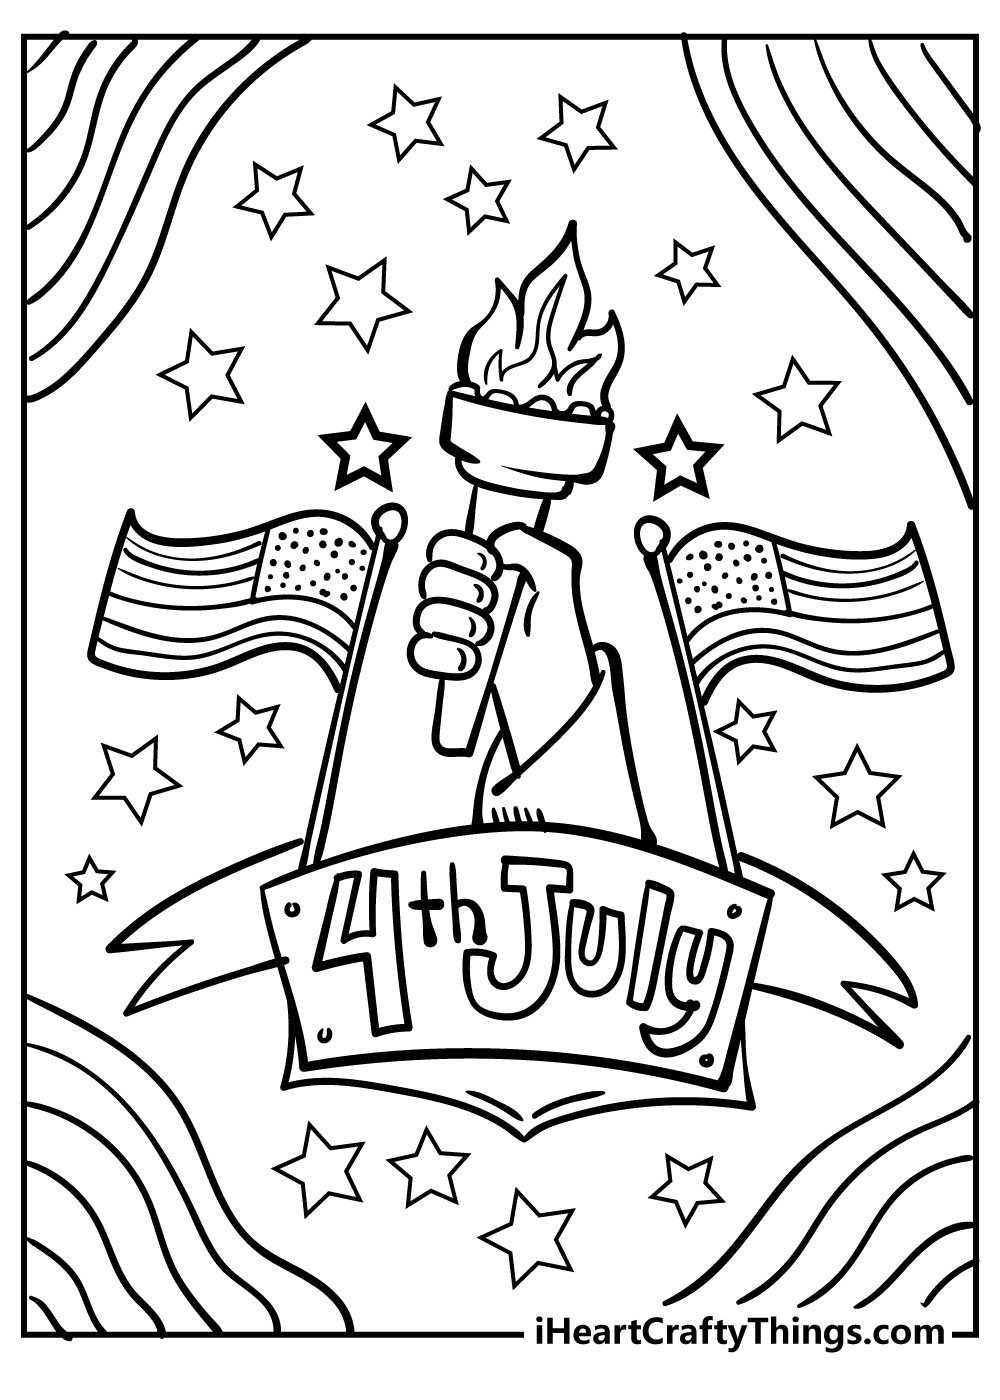 Printable 20th Of July Coloring Pages Updated 20